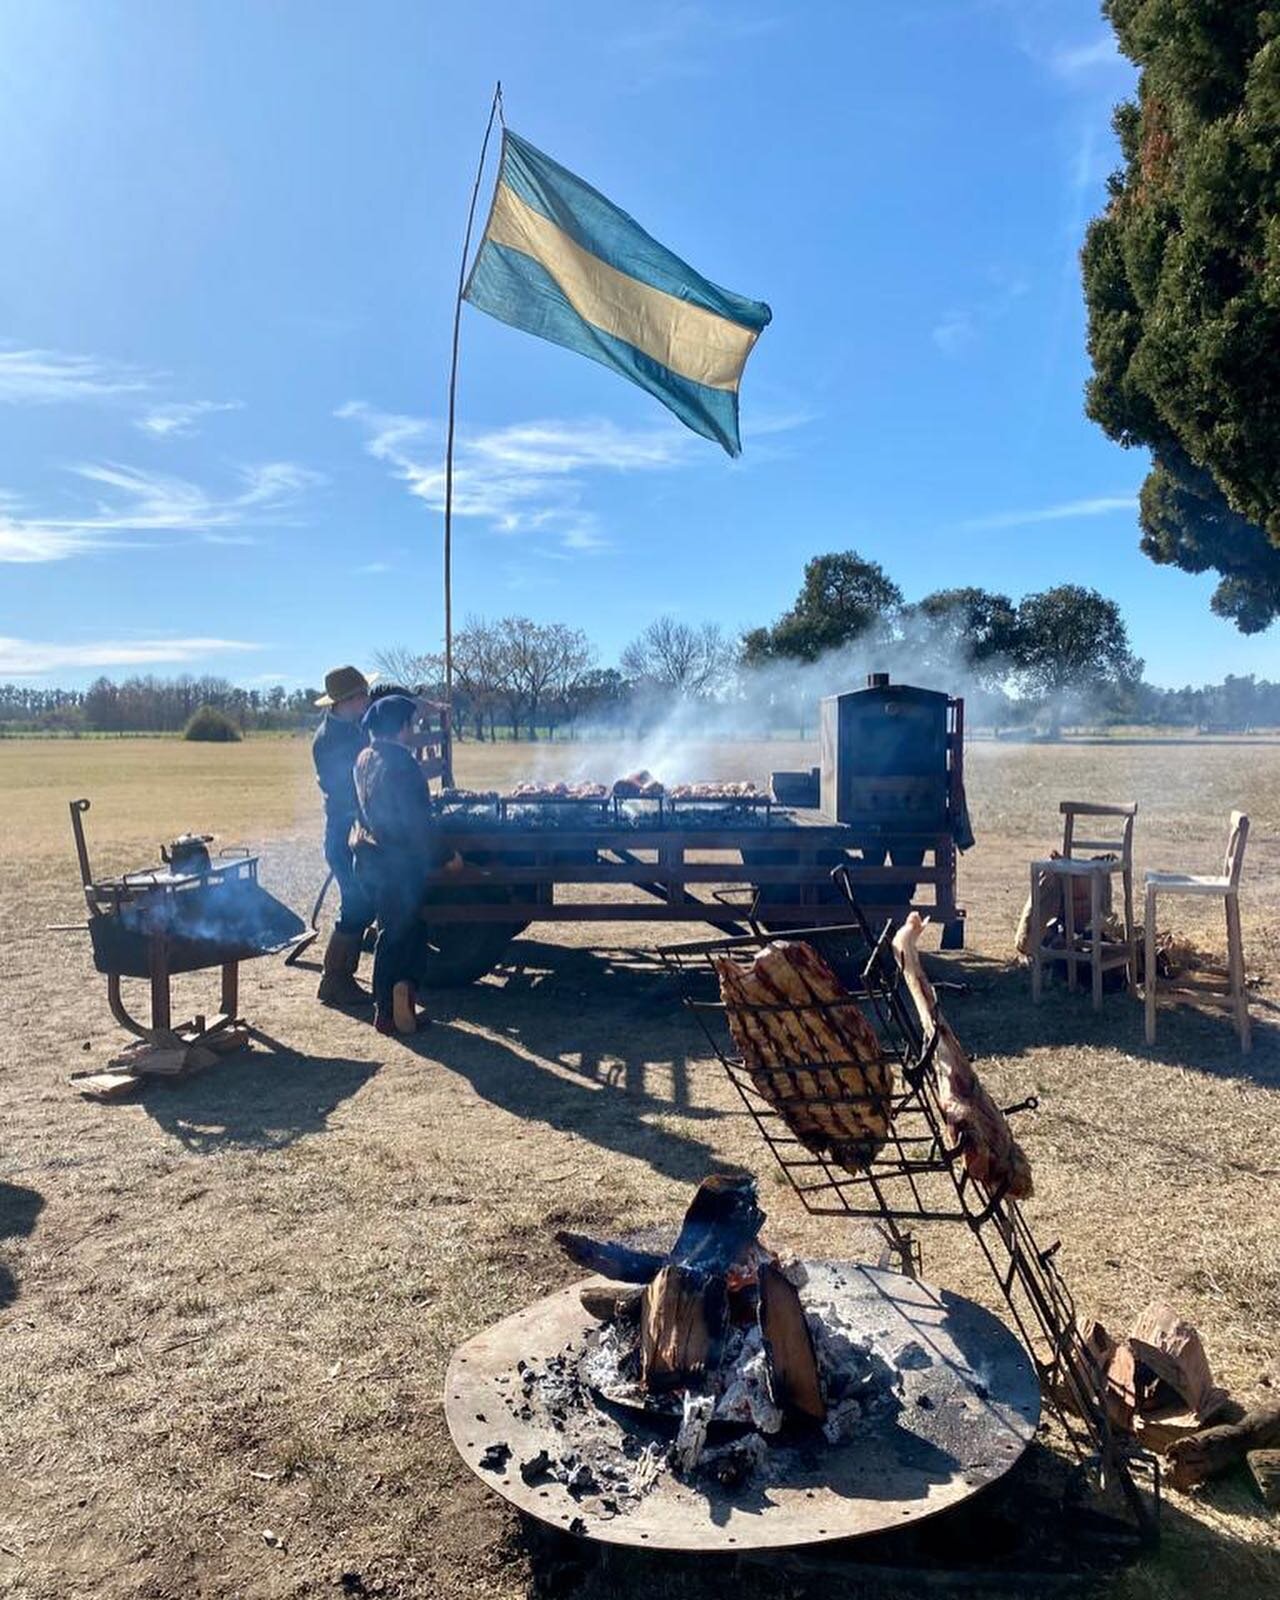 Scenes from an Estancia Day Trip
featuring our mascot Shakespeare 🐾

#buenosairesdaytrips #buenosairesteambuilding #estanciadaytrip #campodaytrip #poloexperienceday #poloexperiencedaytrip #poloexperience #asadolunch